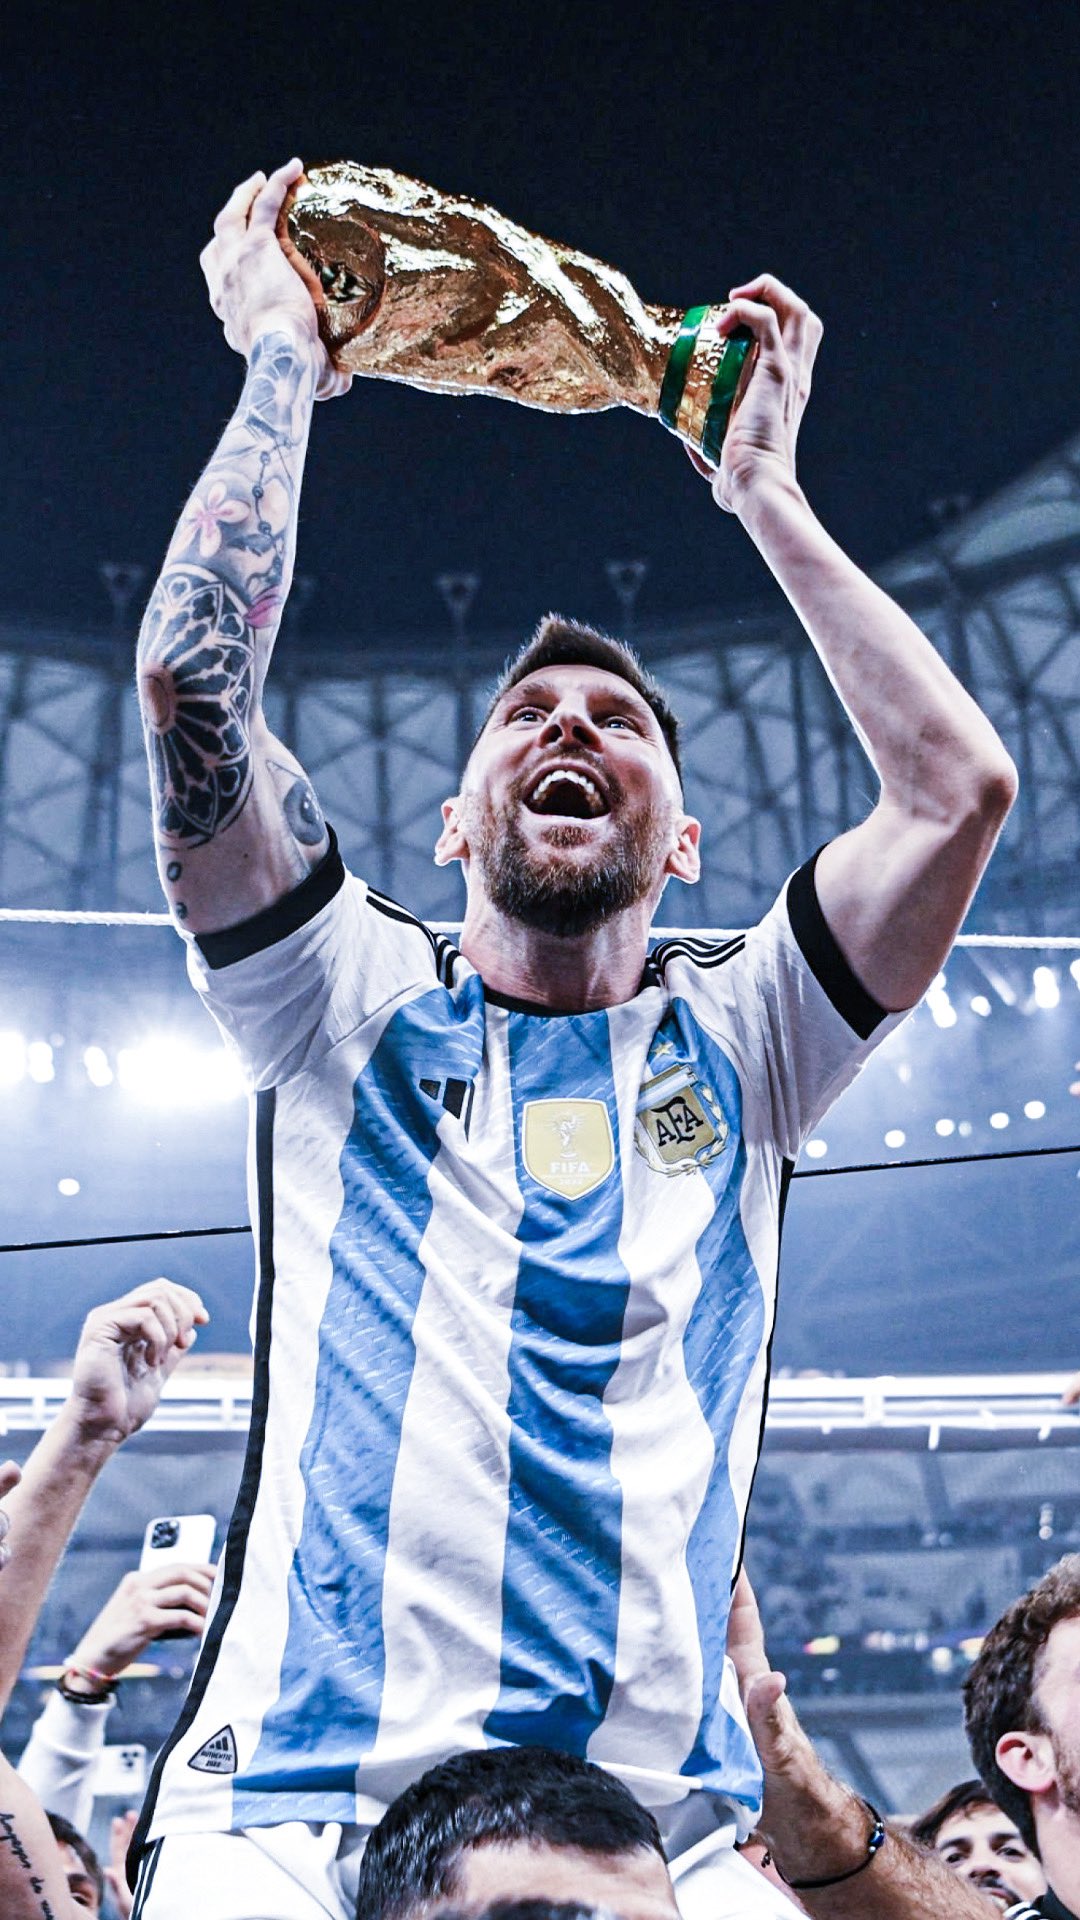 Socios.com with your favorite Leo Messi picture